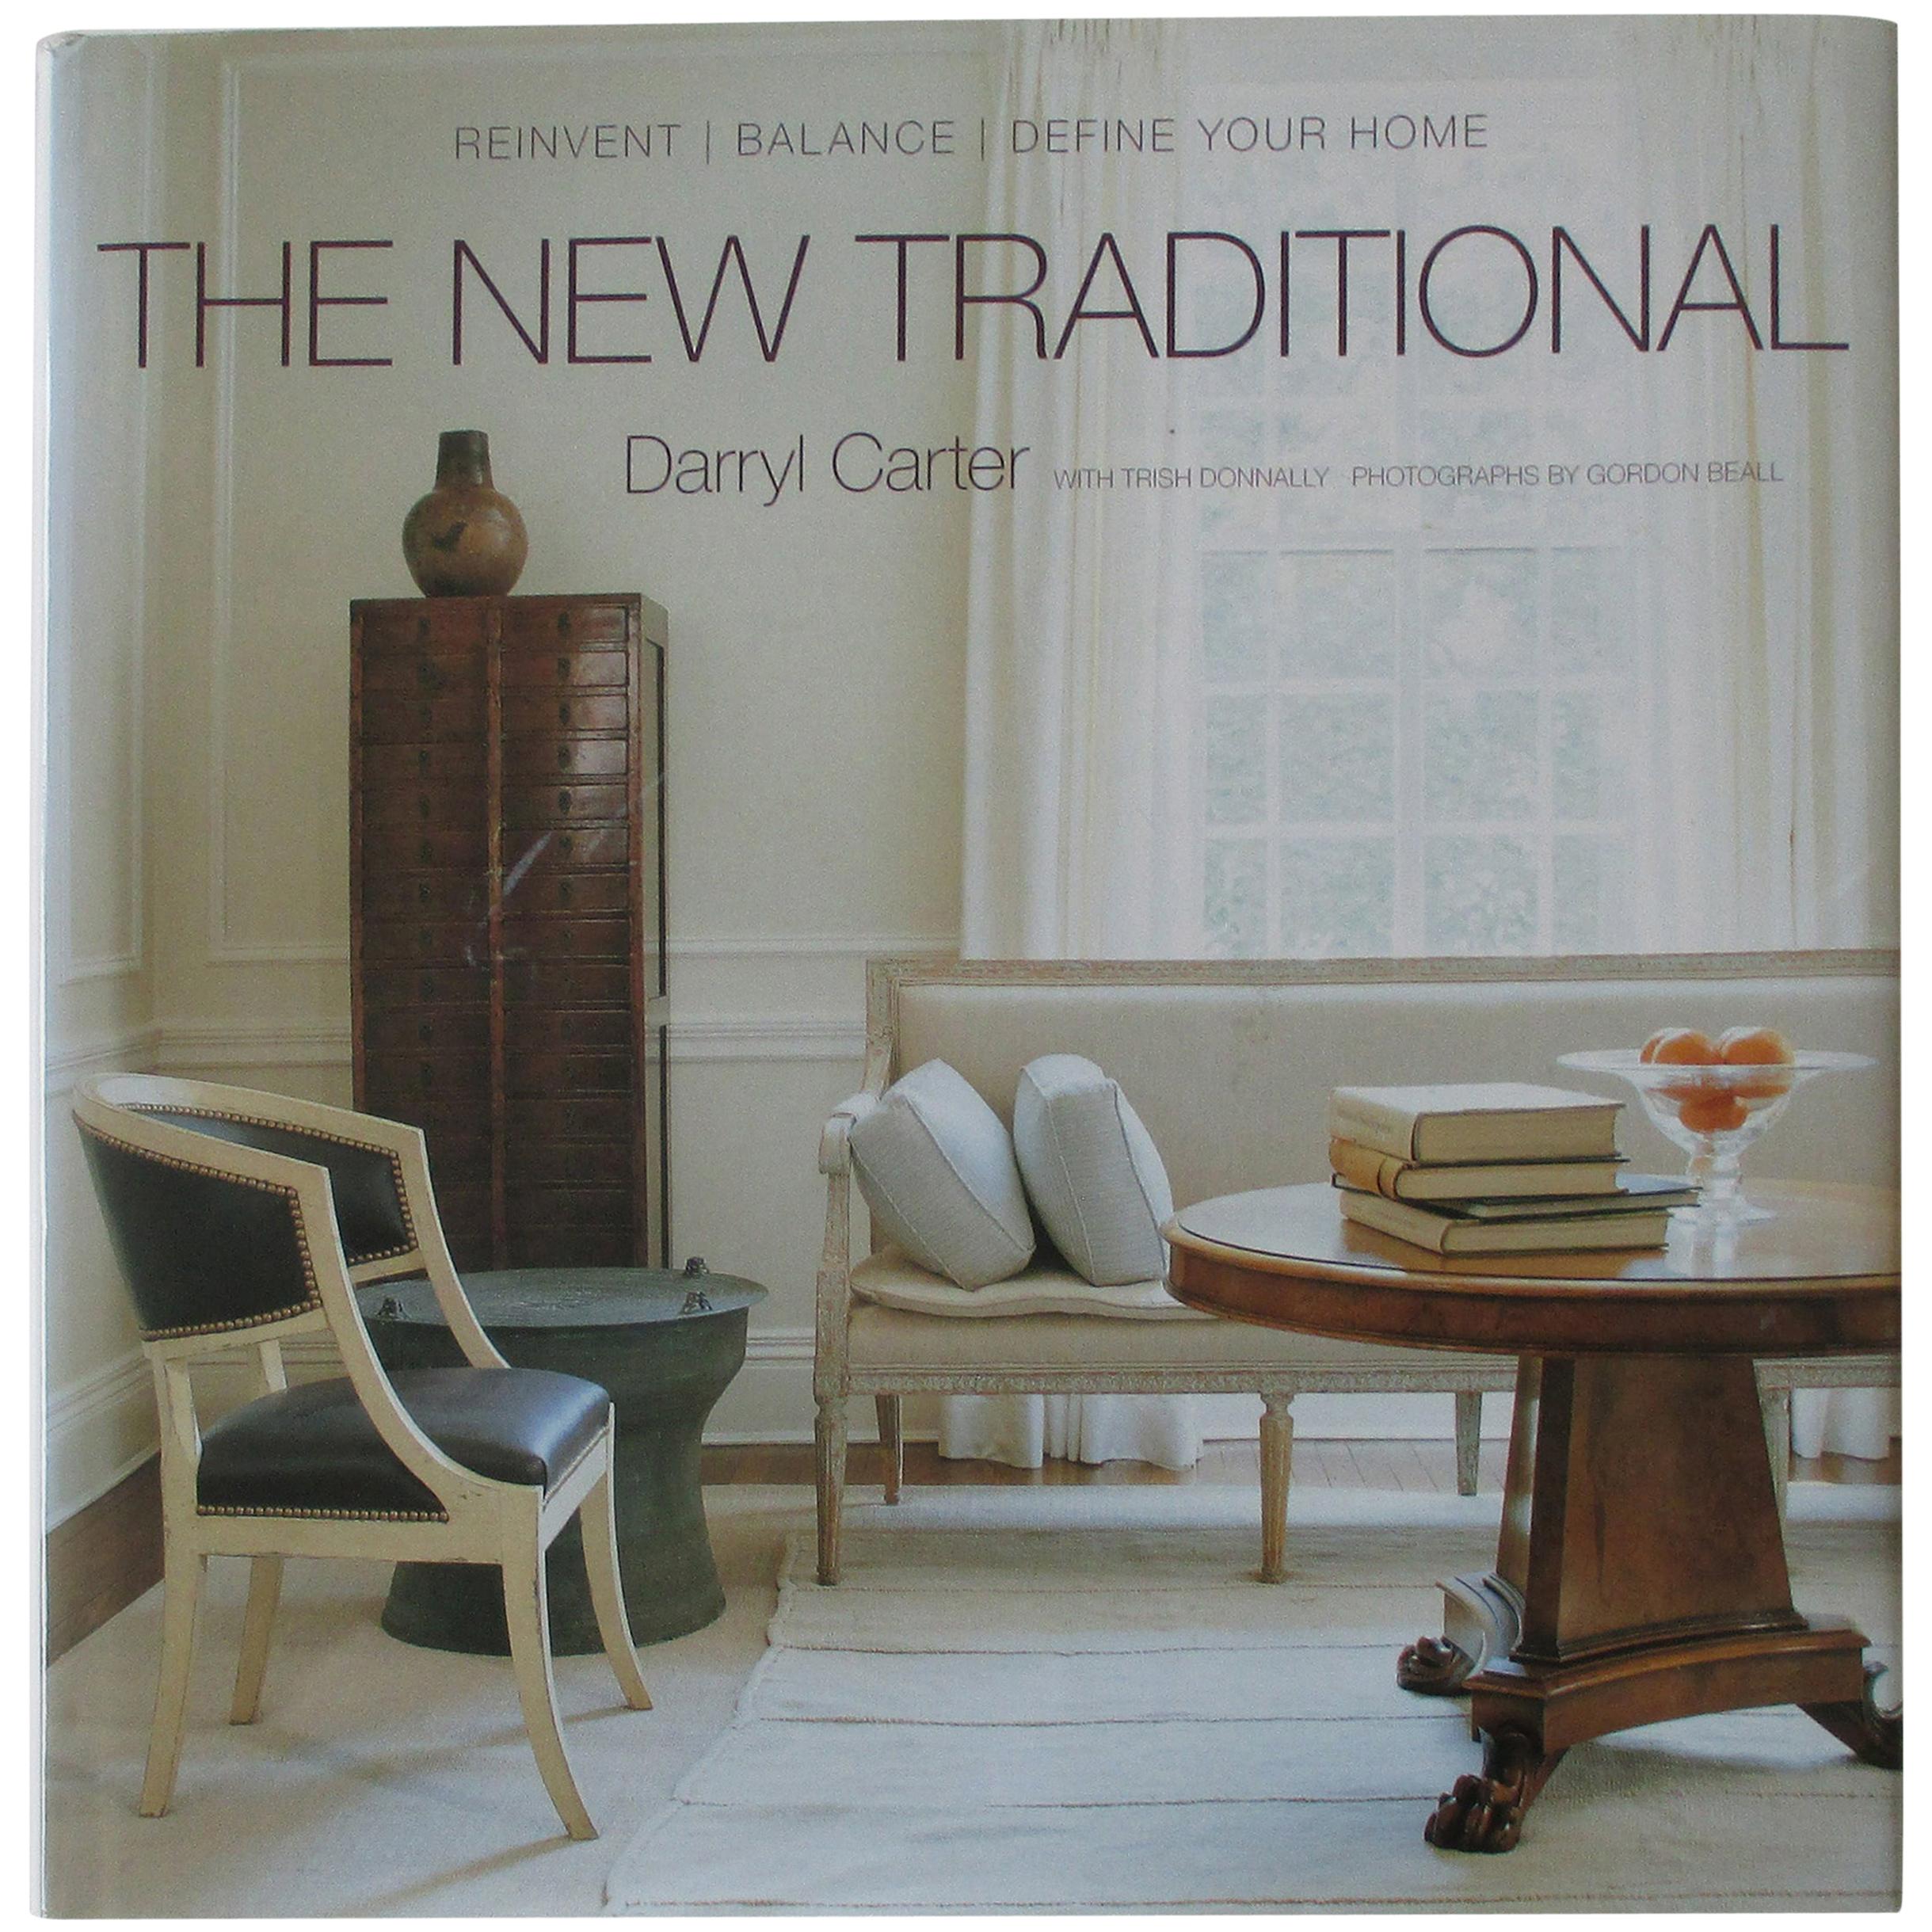 The New Traditional, Reinvent-Balance-Define Your Home Hard Cover Book